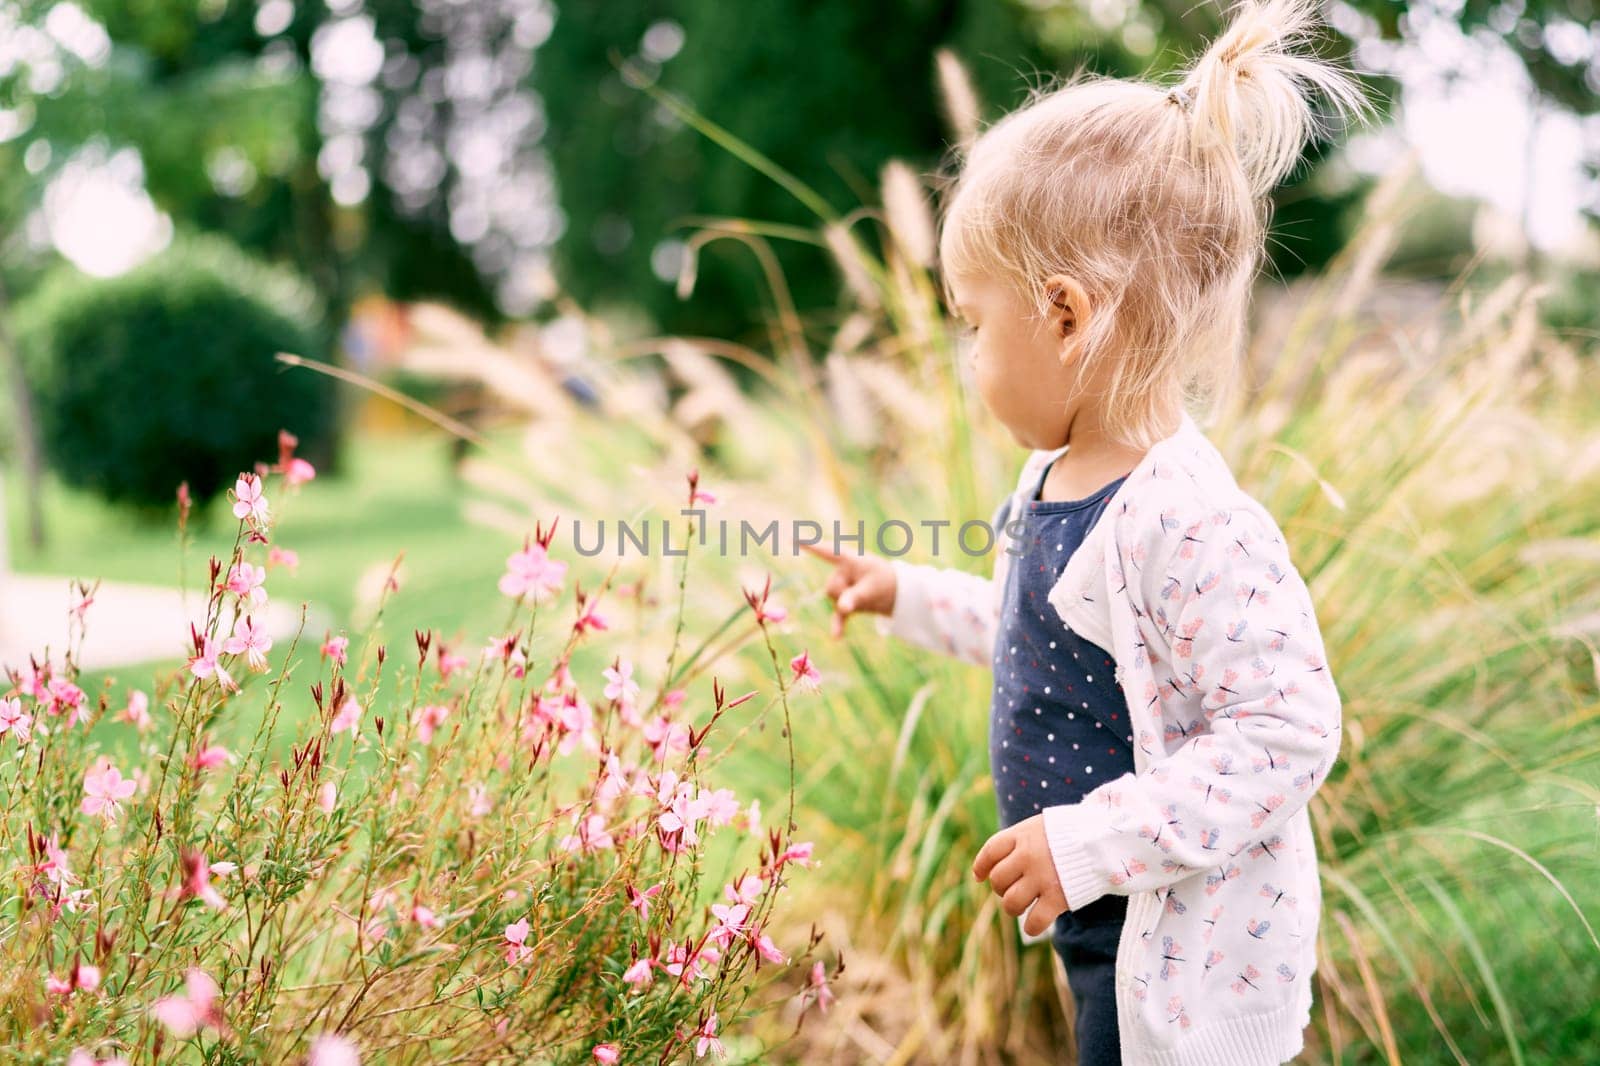 Little girl stands near a flowering bush in the garden and touches the flowers with her fingers. High quality photo